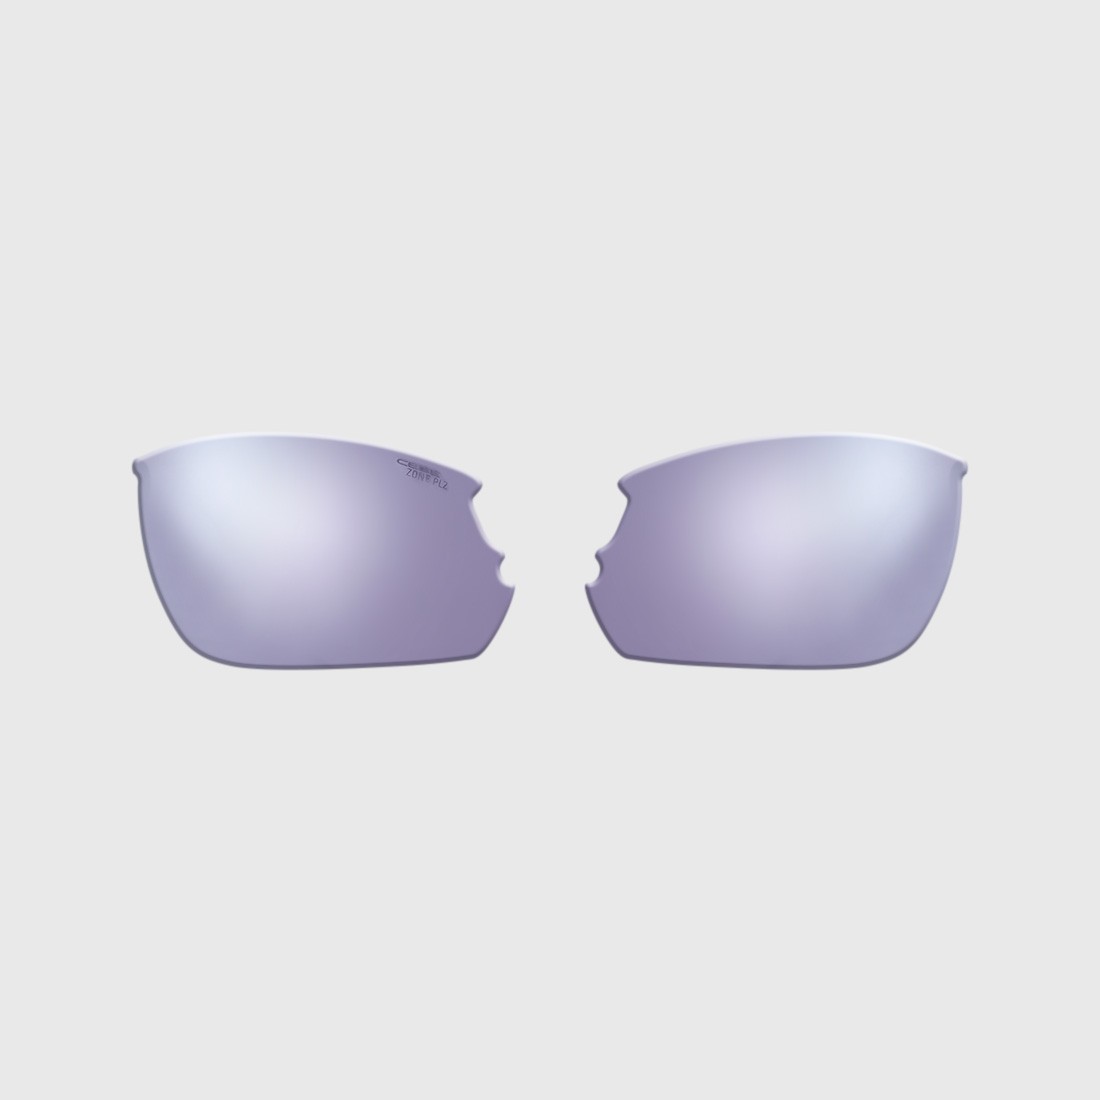 S'TRACK M - REPLACEMENT LENSES